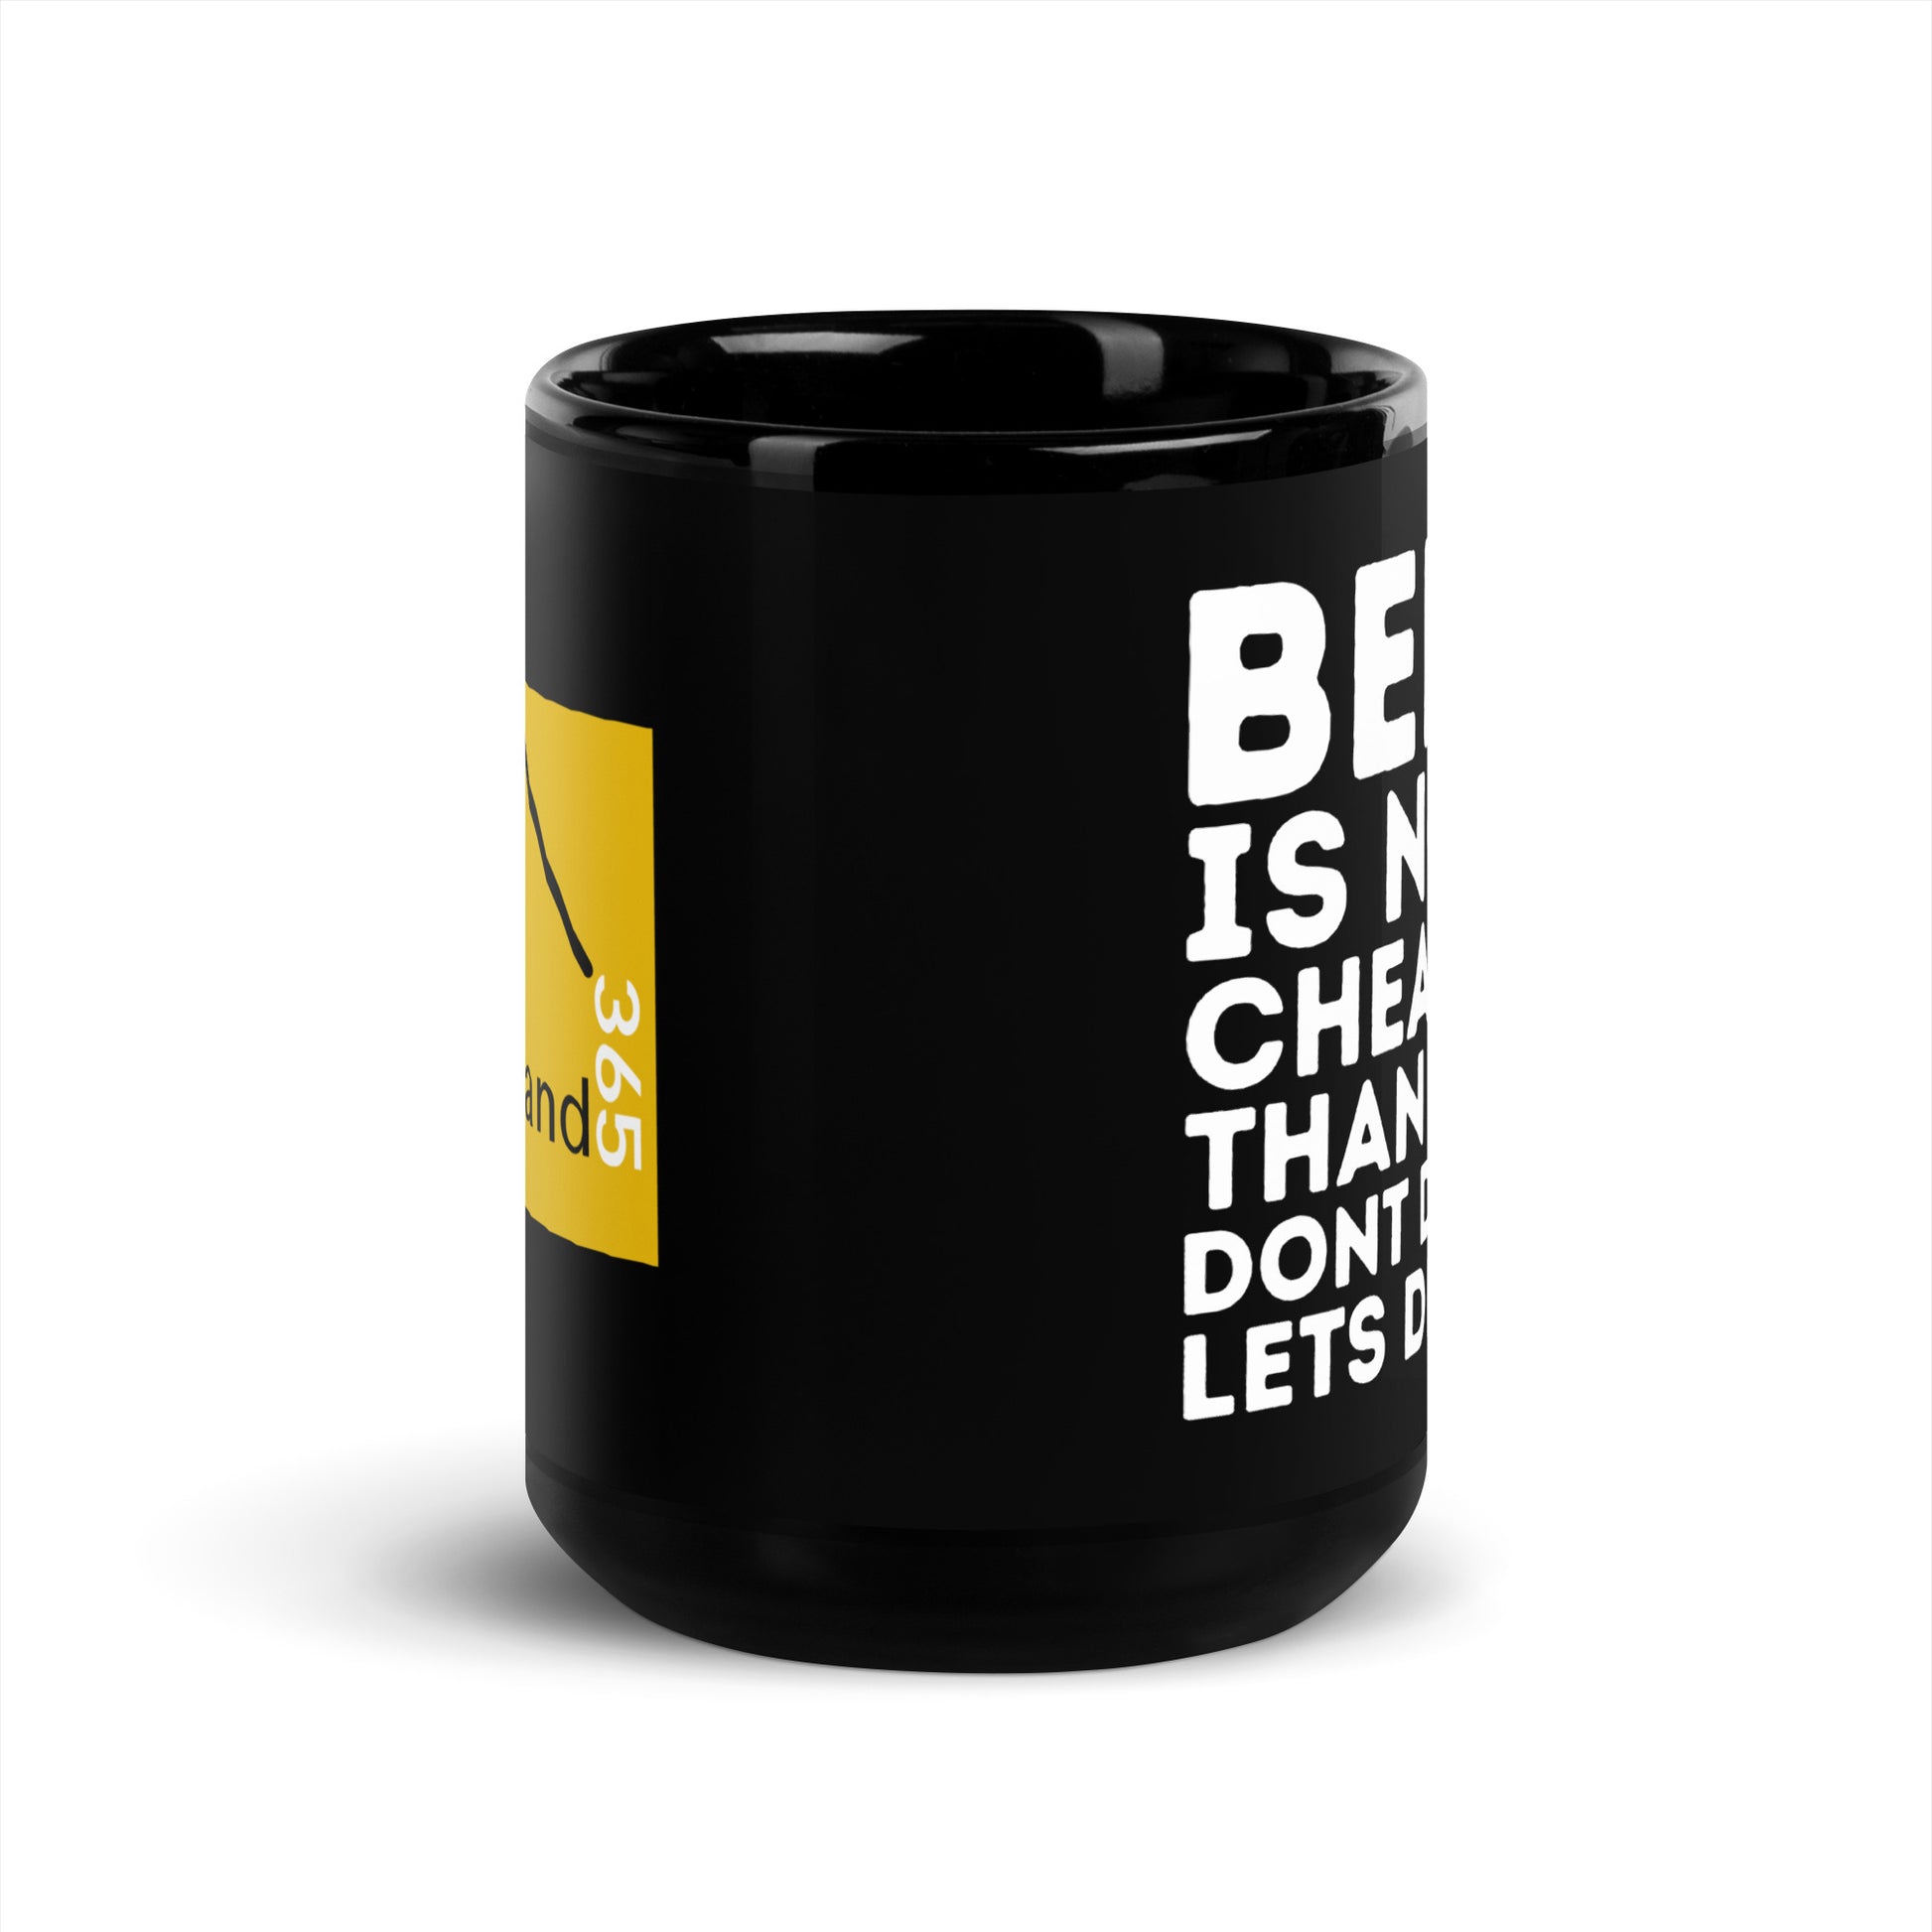 Beer is now cheaper than gas. Dont drive. Lets drink. Black 15oz coffee mug. overland365.com